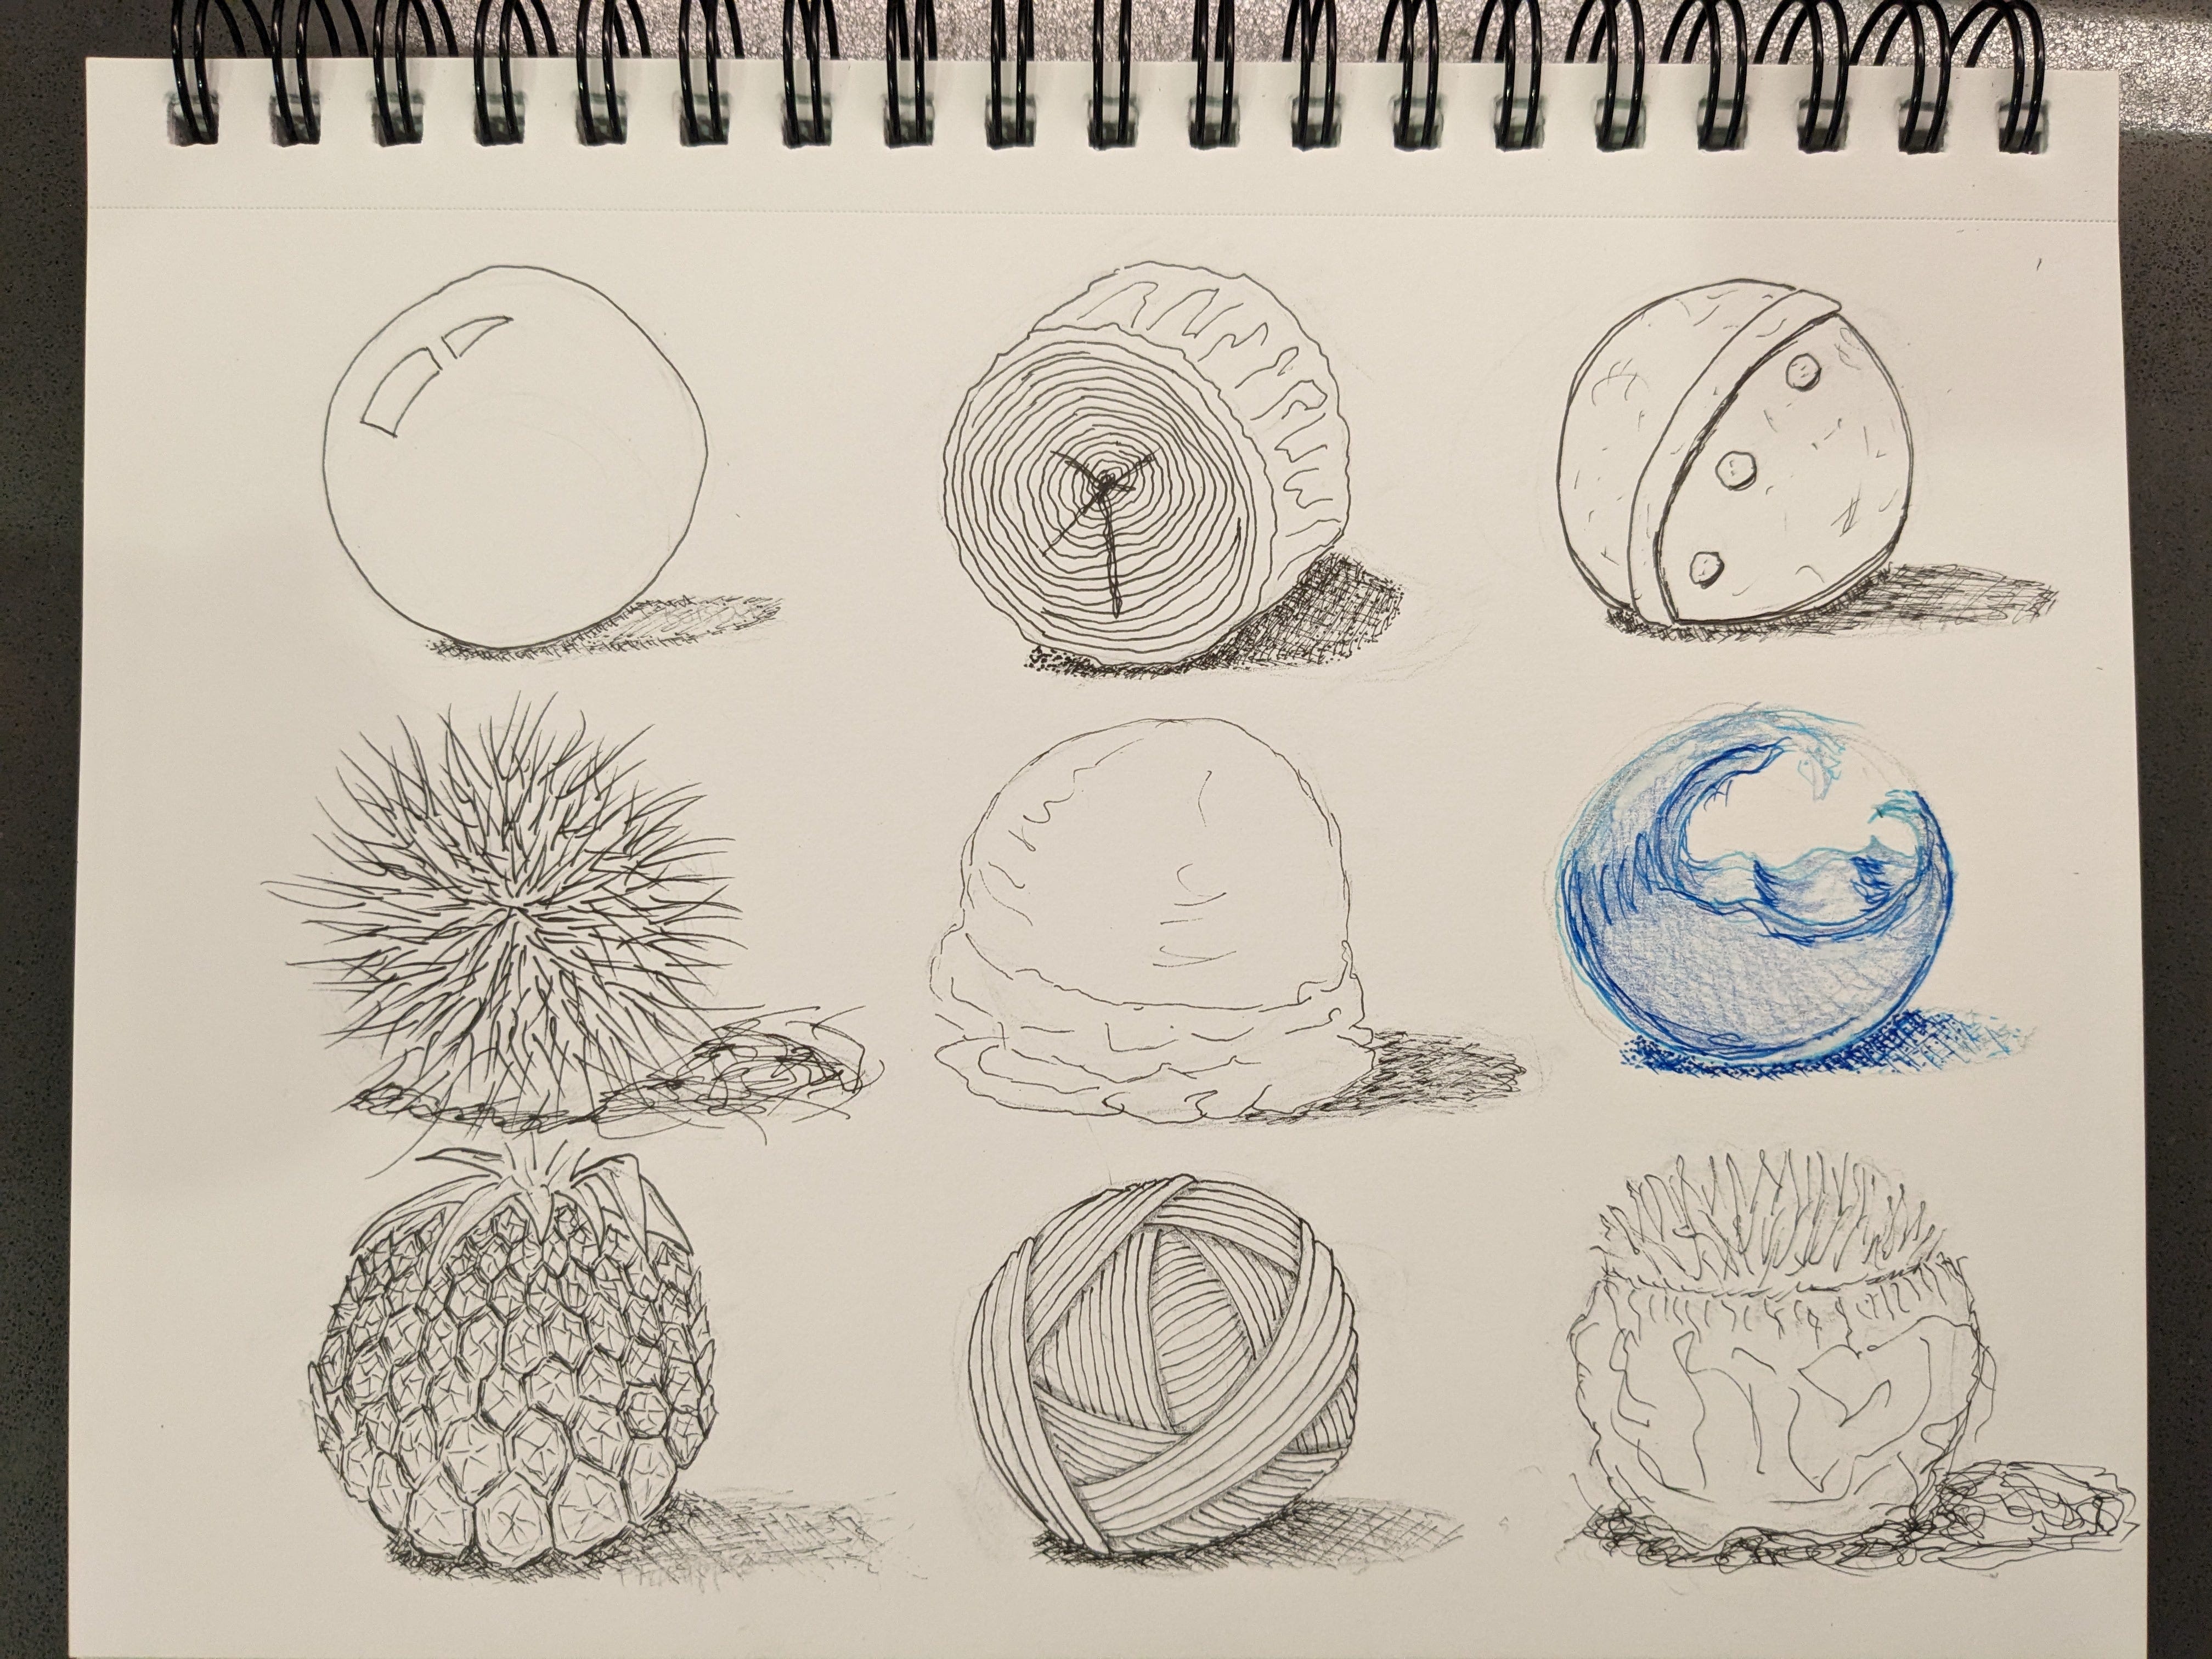 Earth Day! How to draw a pine tree + Hahnemühle sketchbook mini review |  Sandy Allnock